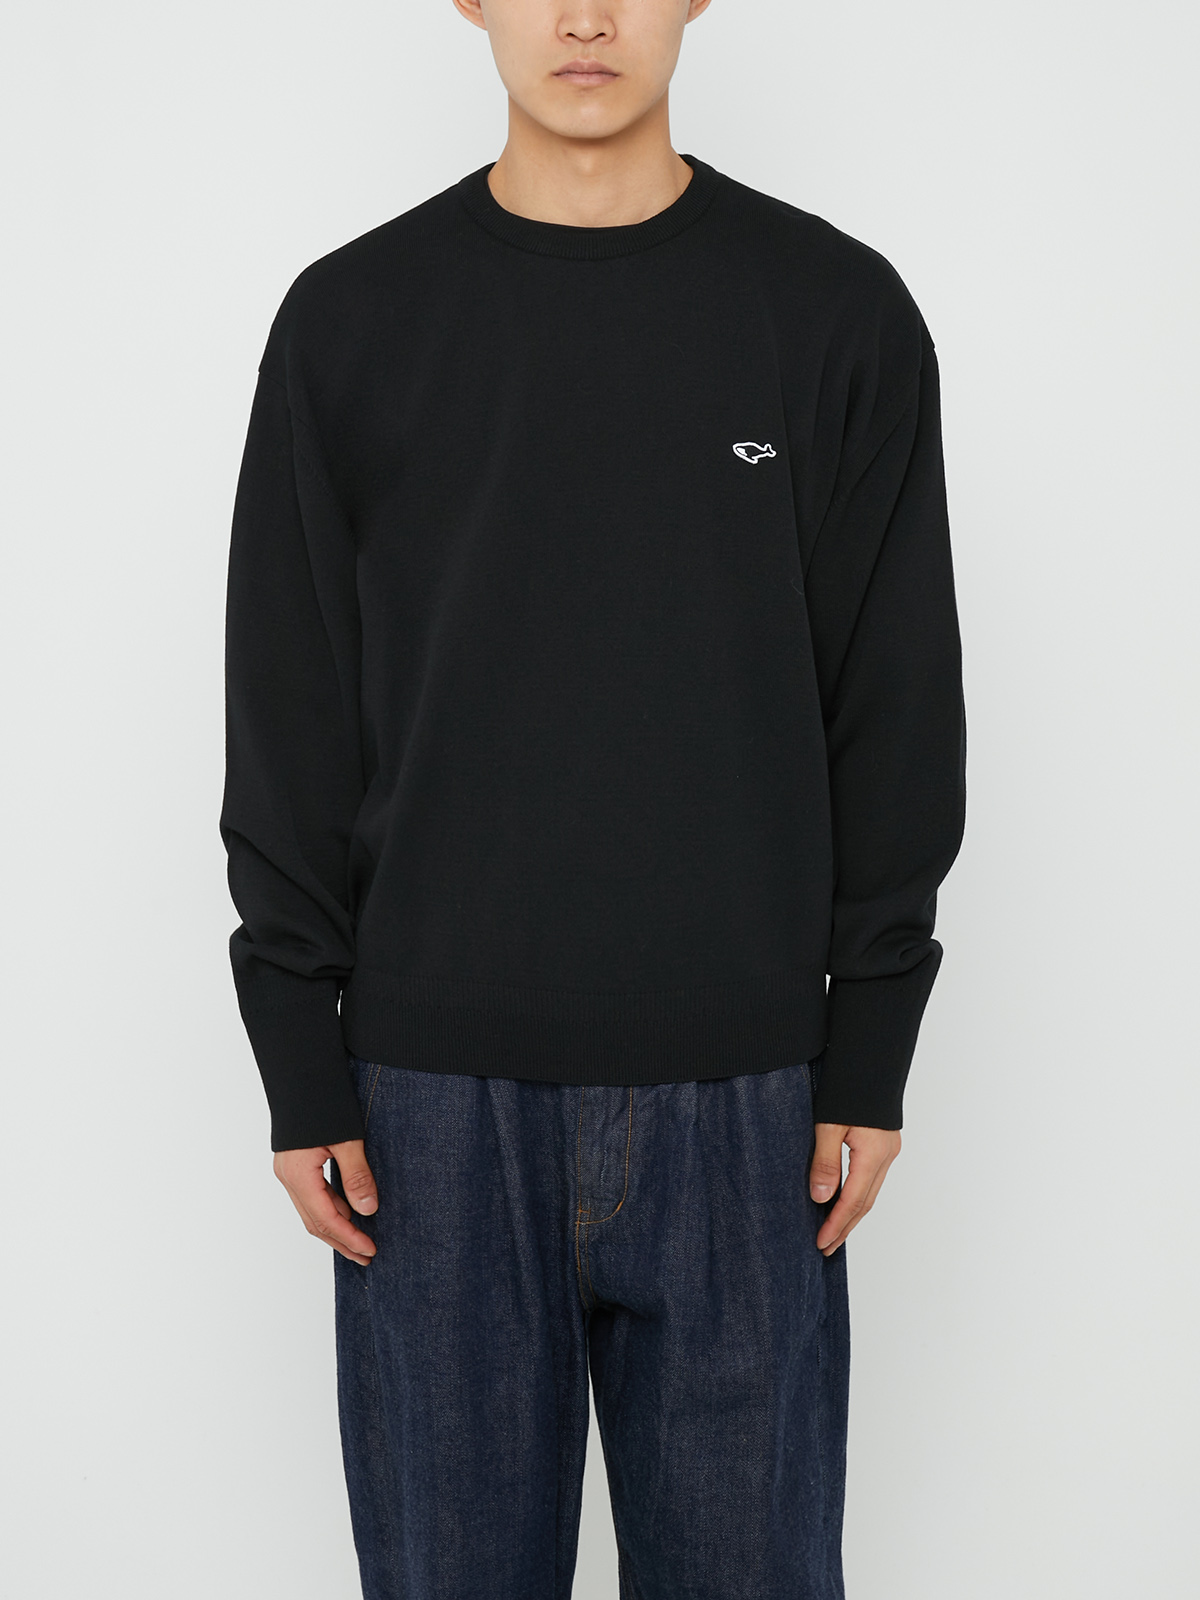 BASIC CRUNCHY KNITTED SWEATER (BLACK)